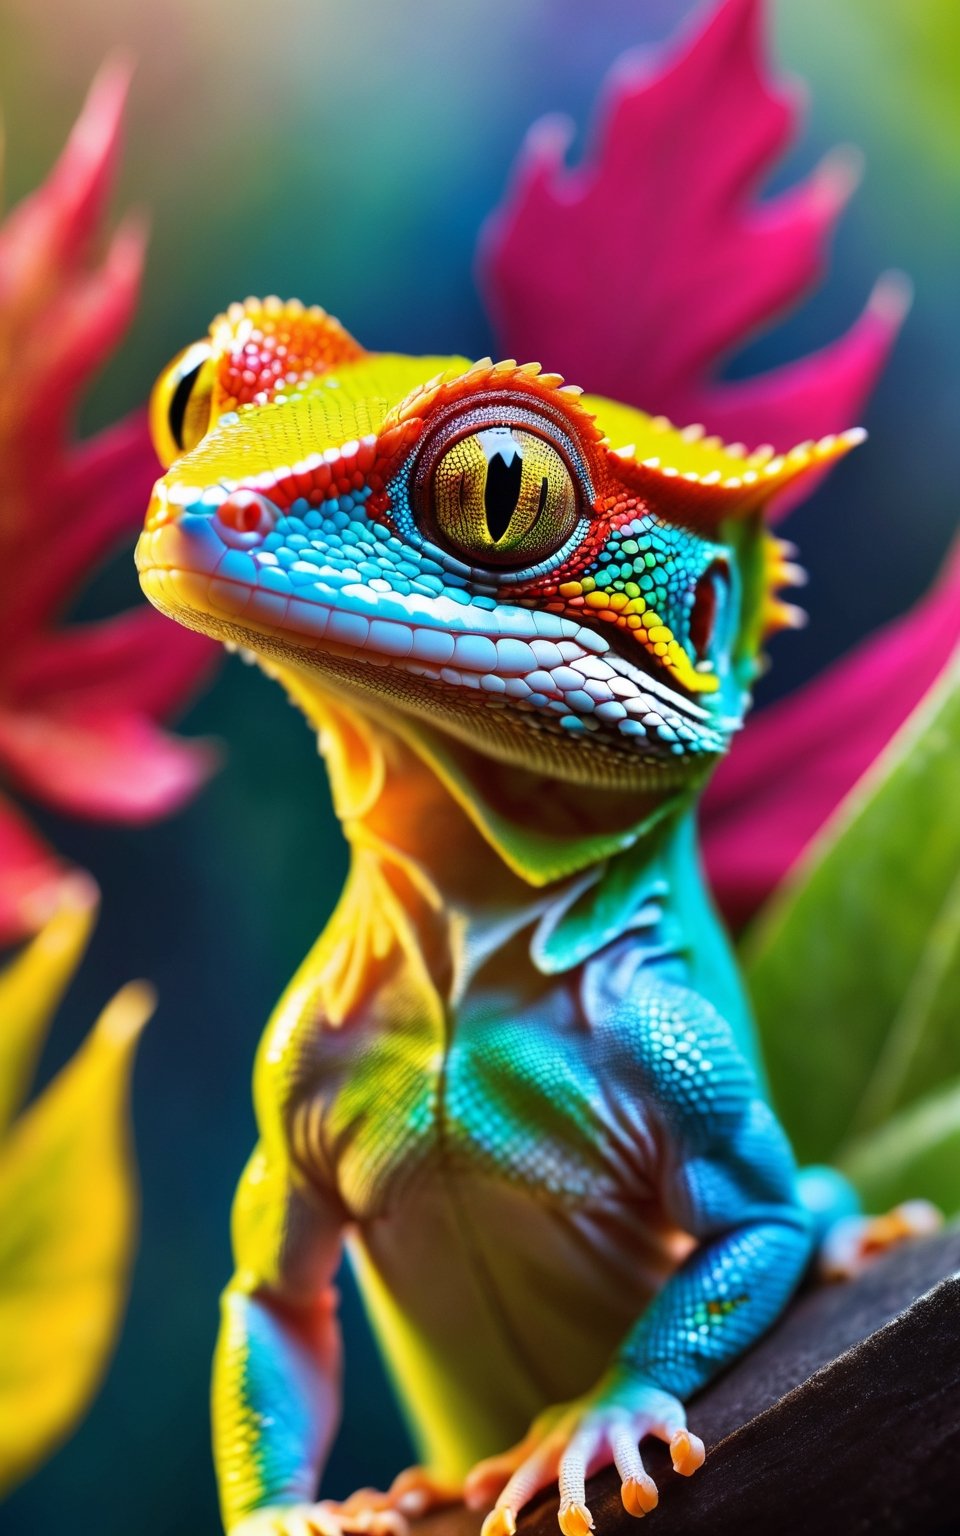 (best quality,8K,highres,masterpiece), ultra-detailed, (ethereal gecko lizard with colorful skin), a majestic gecko lizard with vibrant, colorful skin. The gecko's body is adorned with intricate patterns and hues, creating a mesmerizing display of color and texture. Its big eyes gleam with ethereal beauty, showcasing heterochromia for added visual interest. The overall composition is a masterpiece, capturing the gecko's perfect eyes and exquisite details with unparalleled precision. With the highest quality rendering, this artwork exudes a sense of majesty and wonder. The depth of field effect adds dimension to the scene, drawing the viewer's gaze to the gecko's stunning features. Feel free to explore easy negative space to accentuate the gecko's presence and make it stand out even more in this captivating artwork.